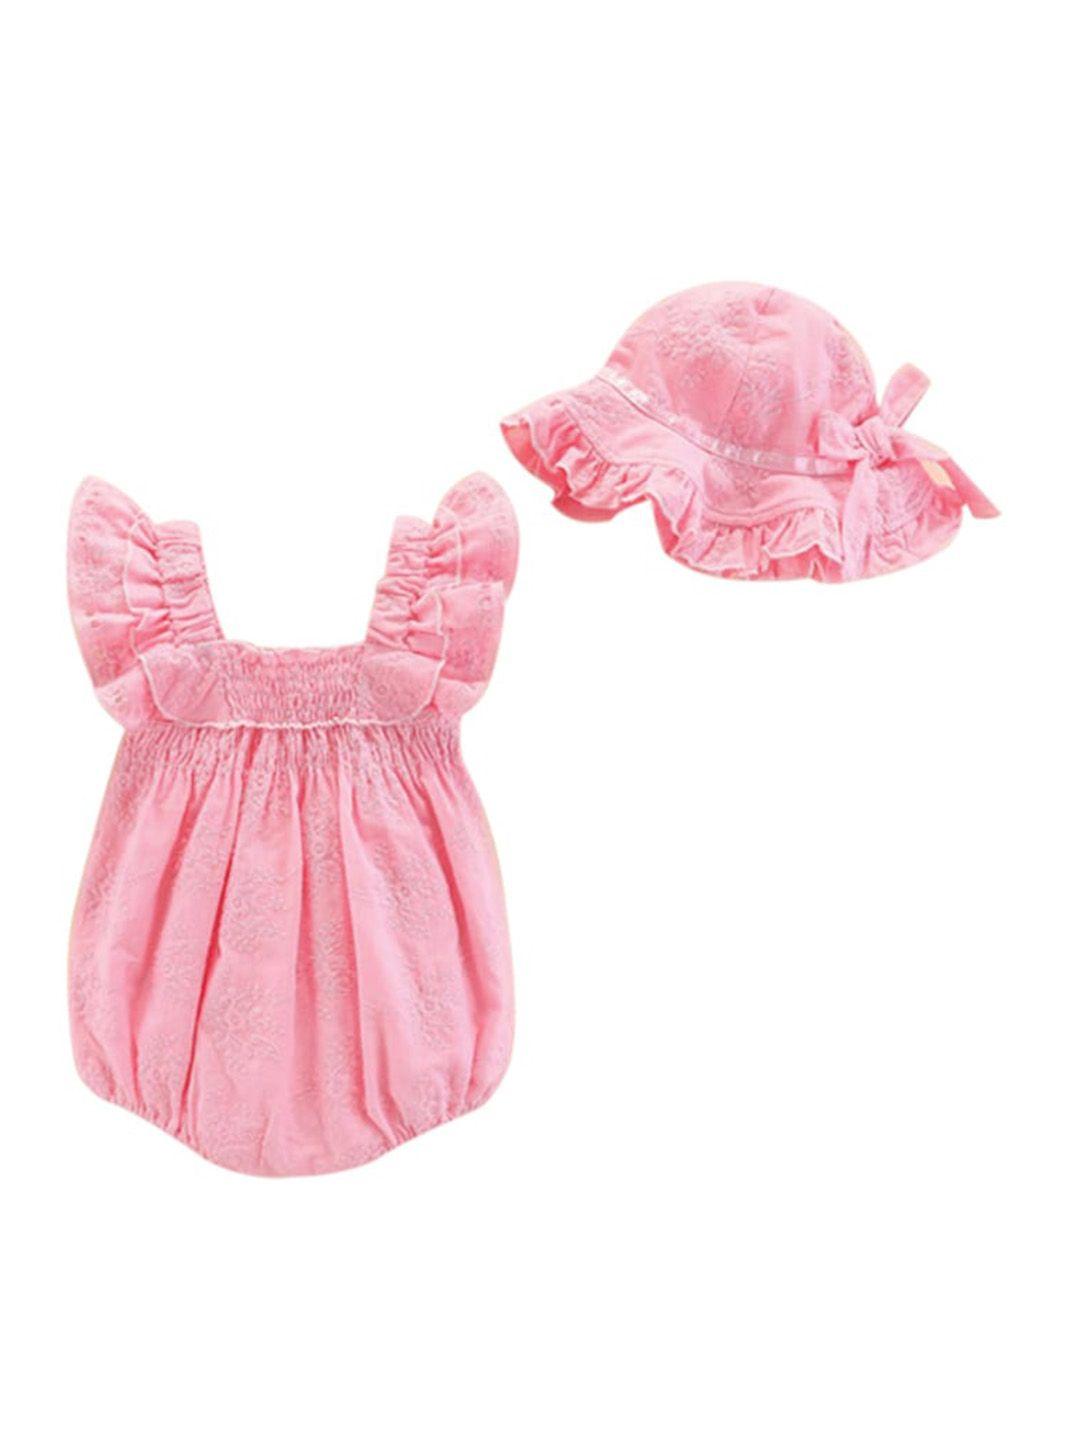 stylecast-infant-girls-cotton-romper-with-hat